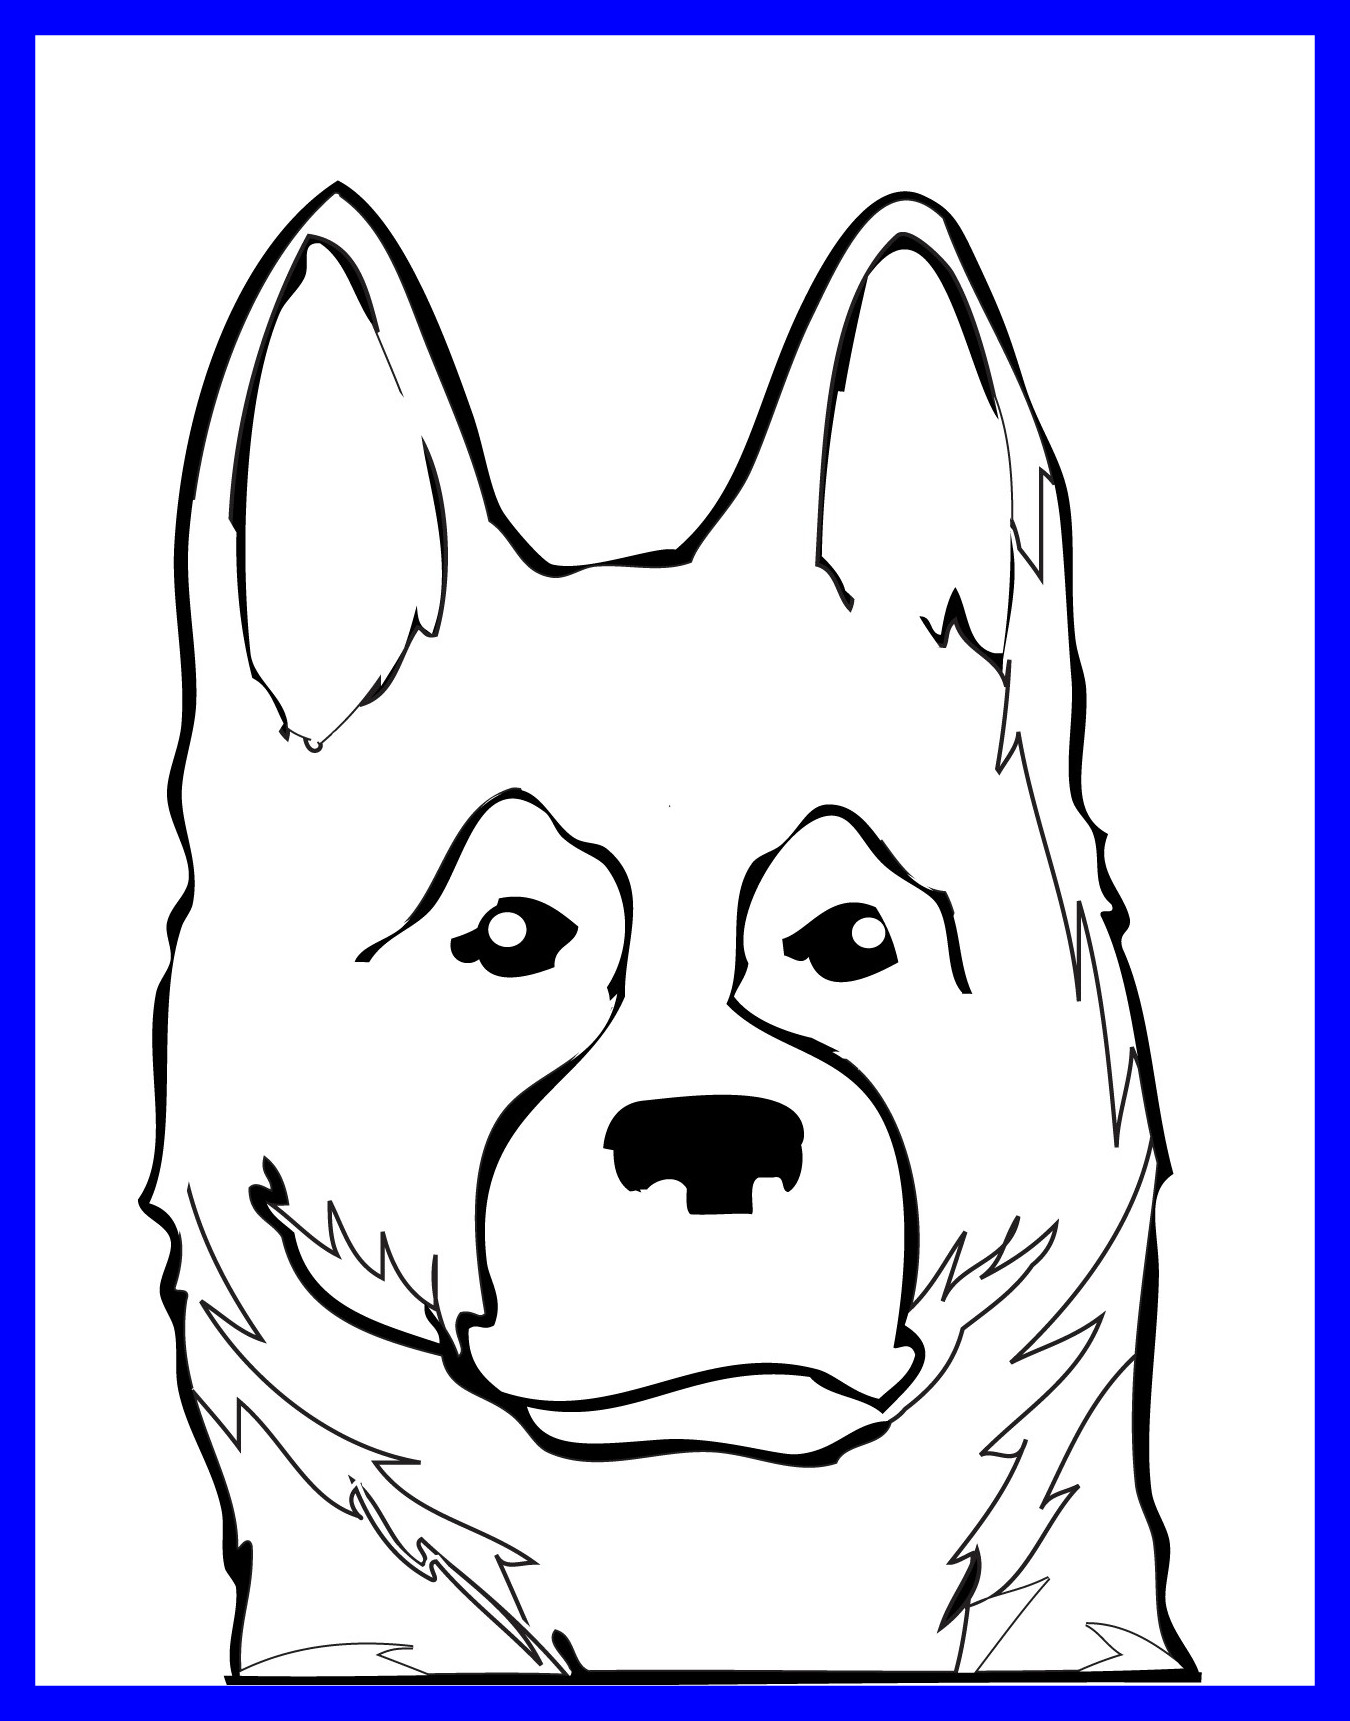 Dog Face Coloring Page at GetColorings.com | Free printable colorings ...